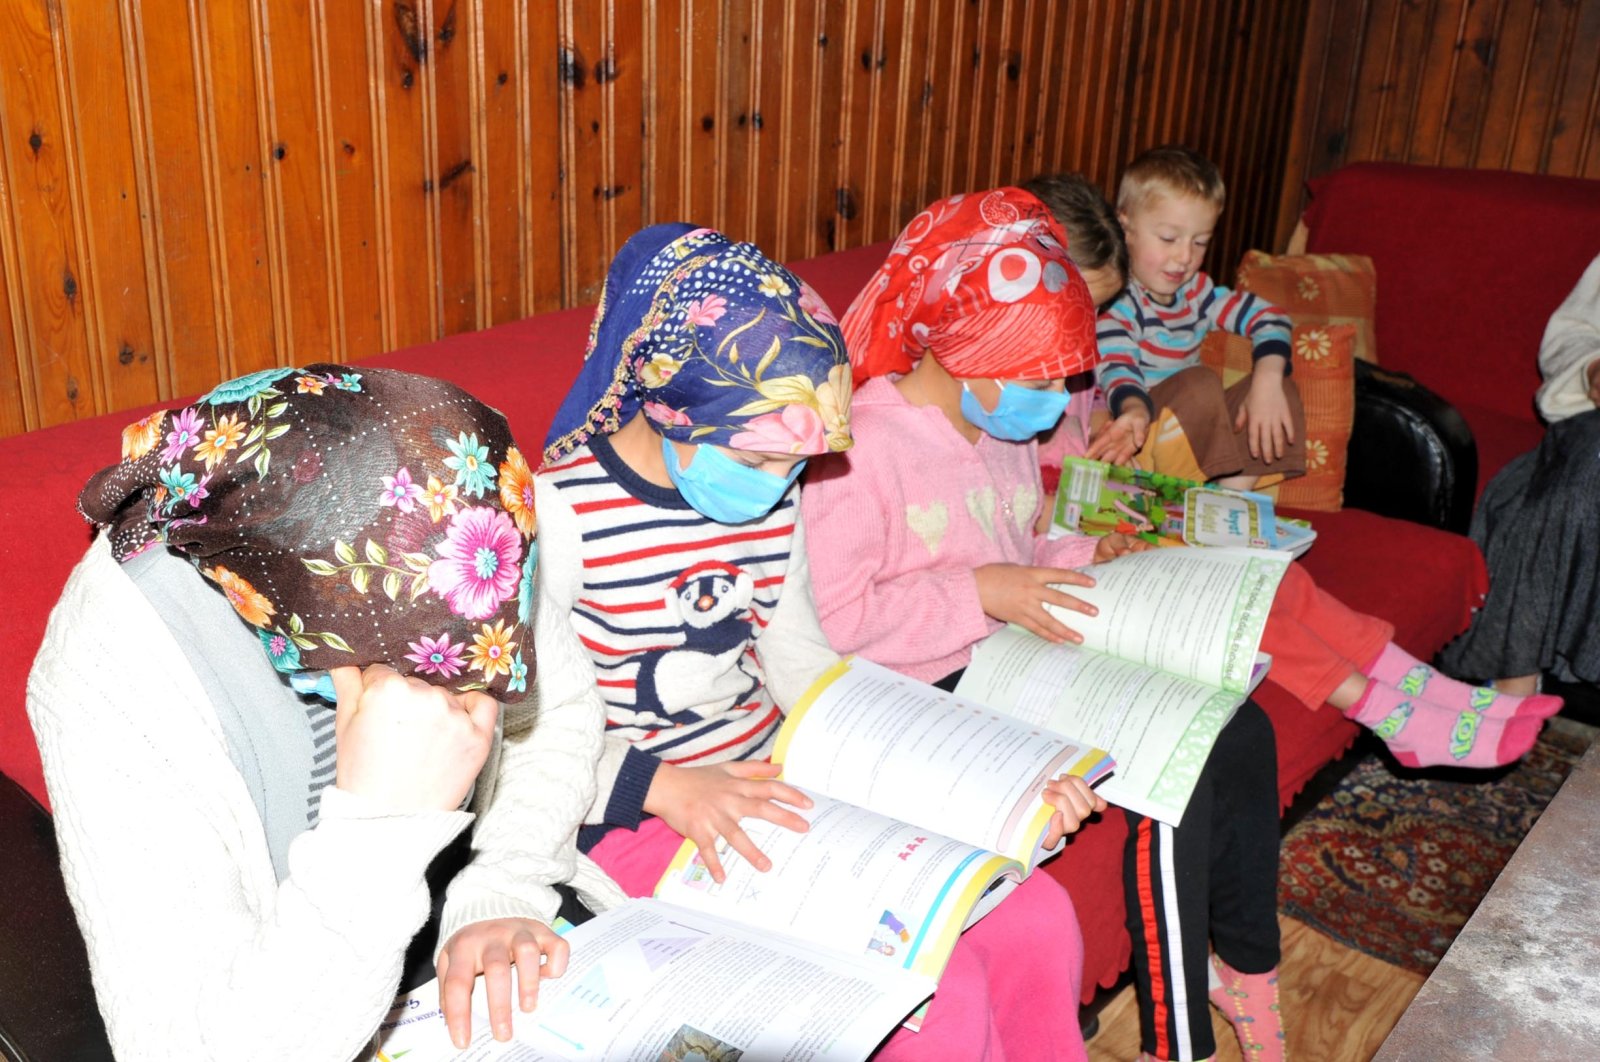 Three sisters study at home after schools were closed due to the pandemic, in Trabzon, northern Turkey, Dec. 9, 2020. (DHA PHOTO)